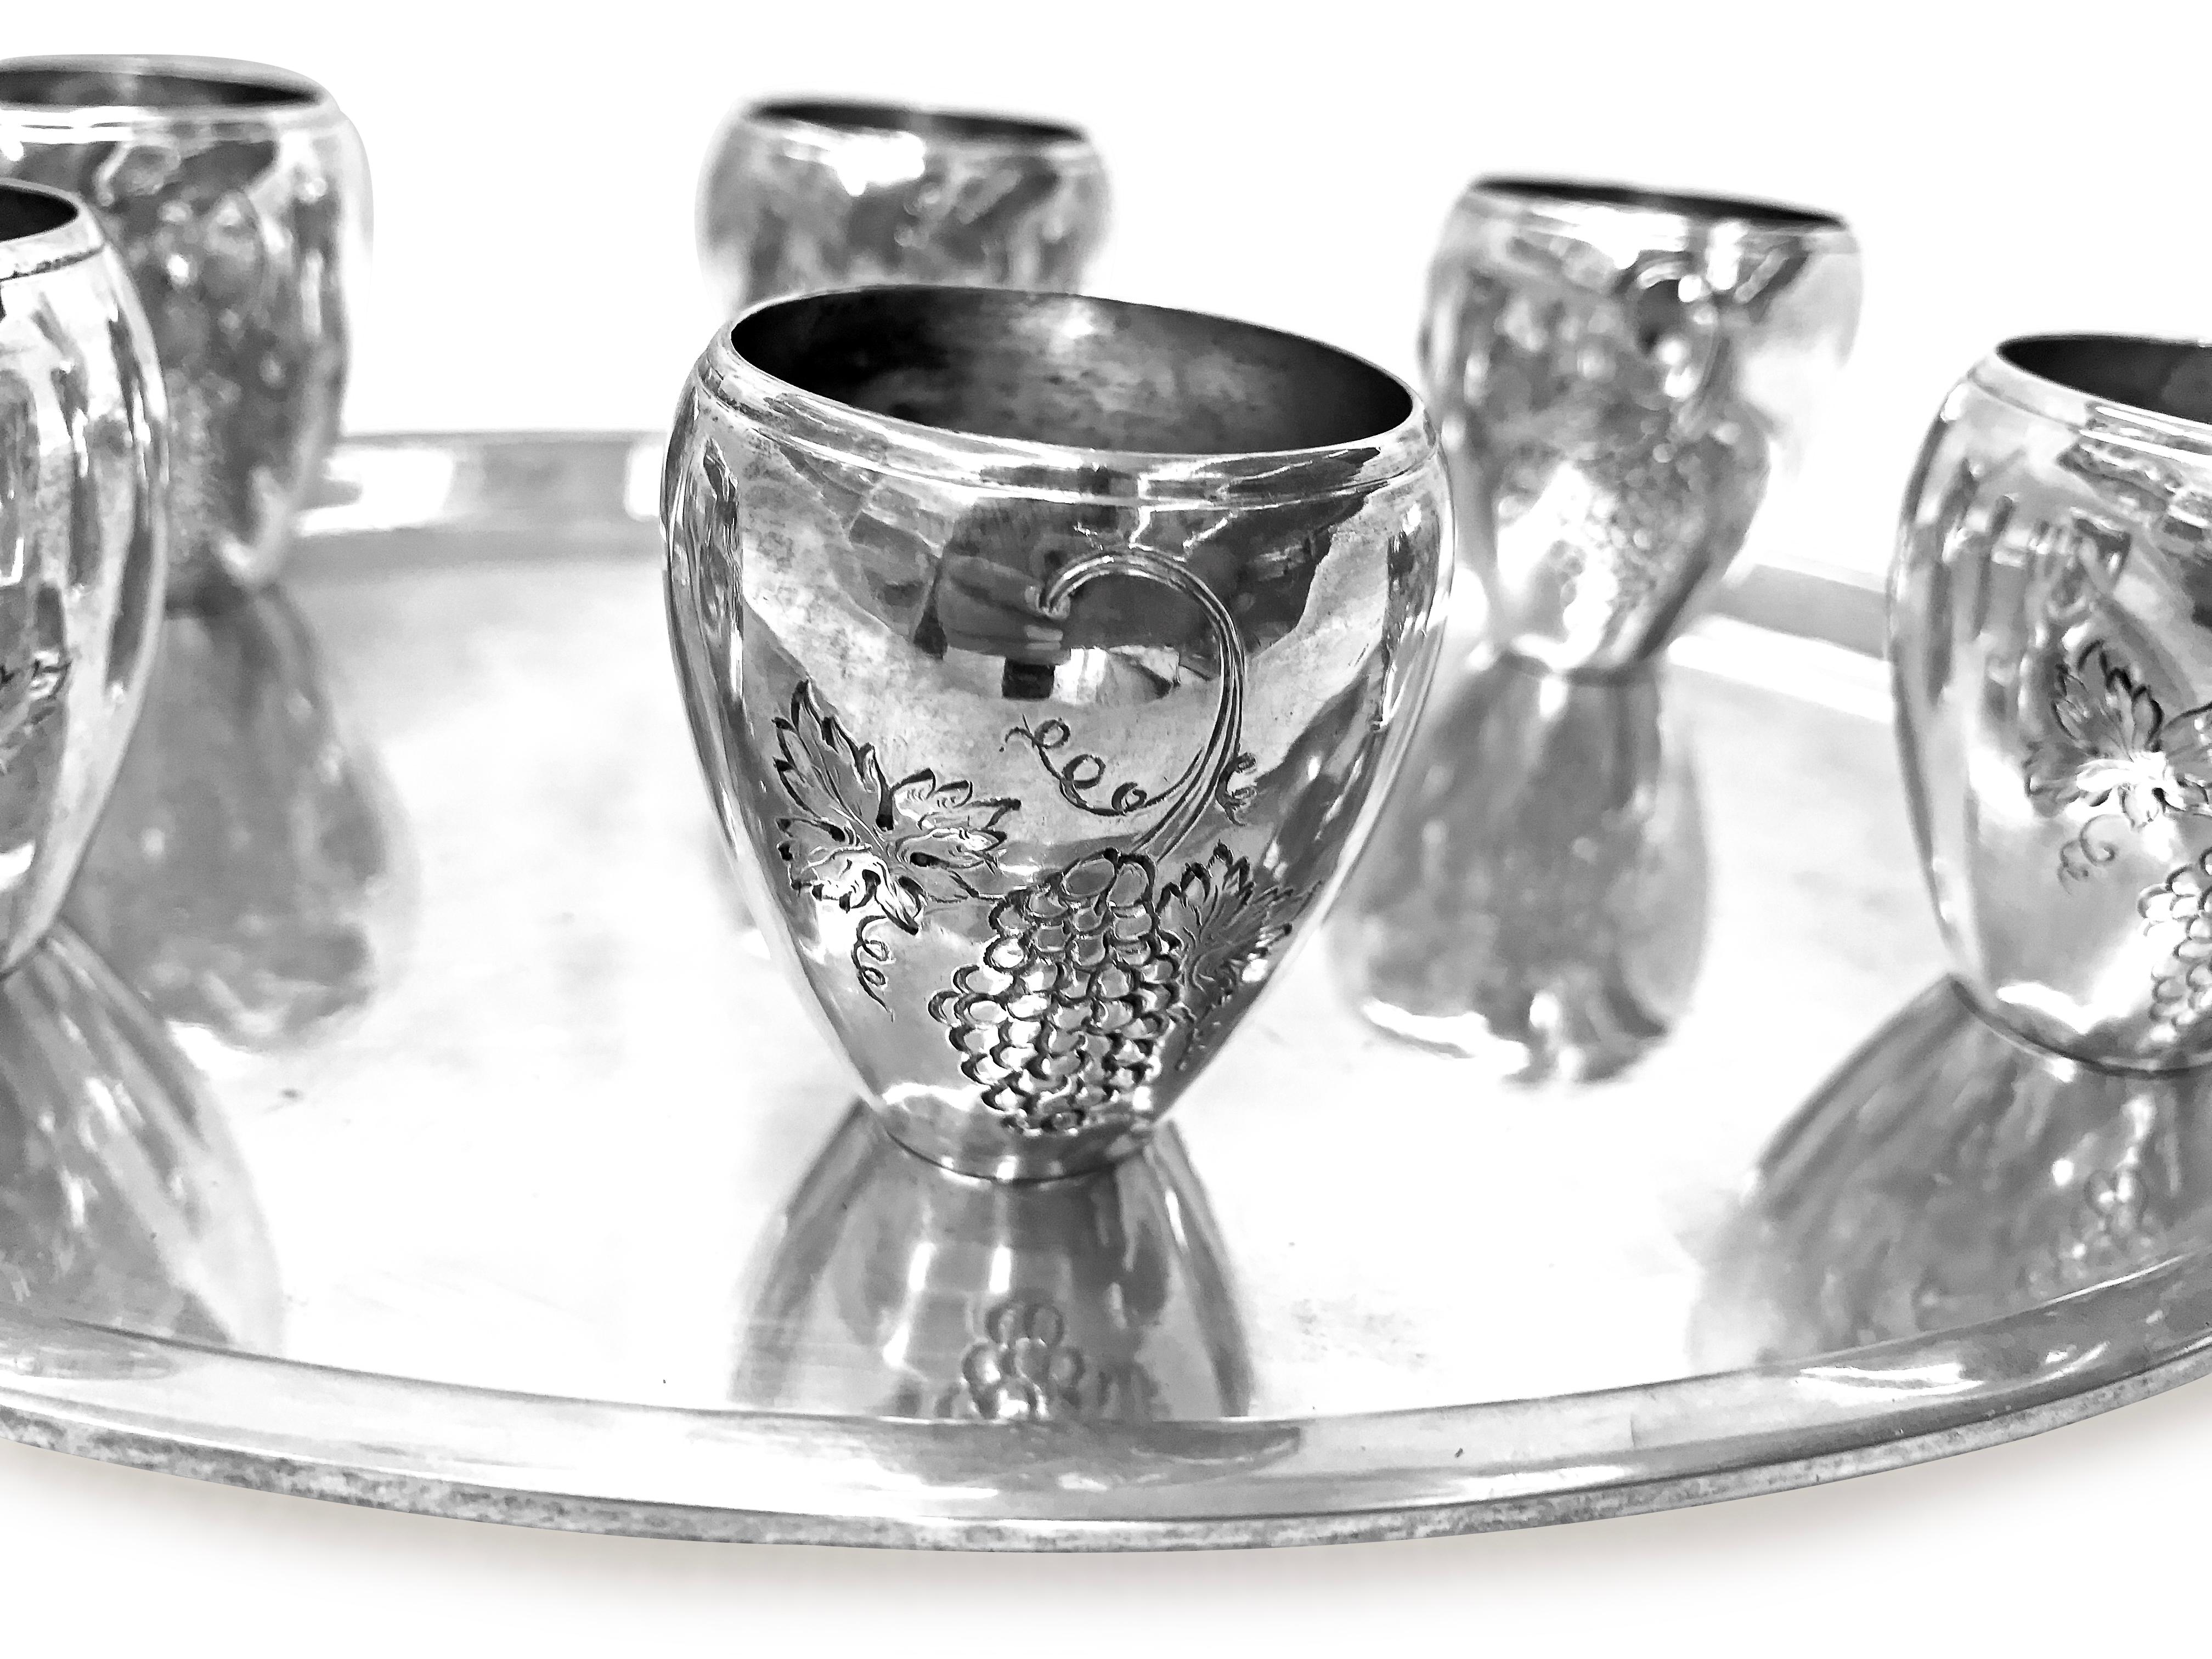 This unique piece of sterling silver set is including 6 beautiful shape cups with very delicate grape engraving design on them . They have like an egg shape with design around them . The tray is simple and pretty with oval shape. There is a BK stamp